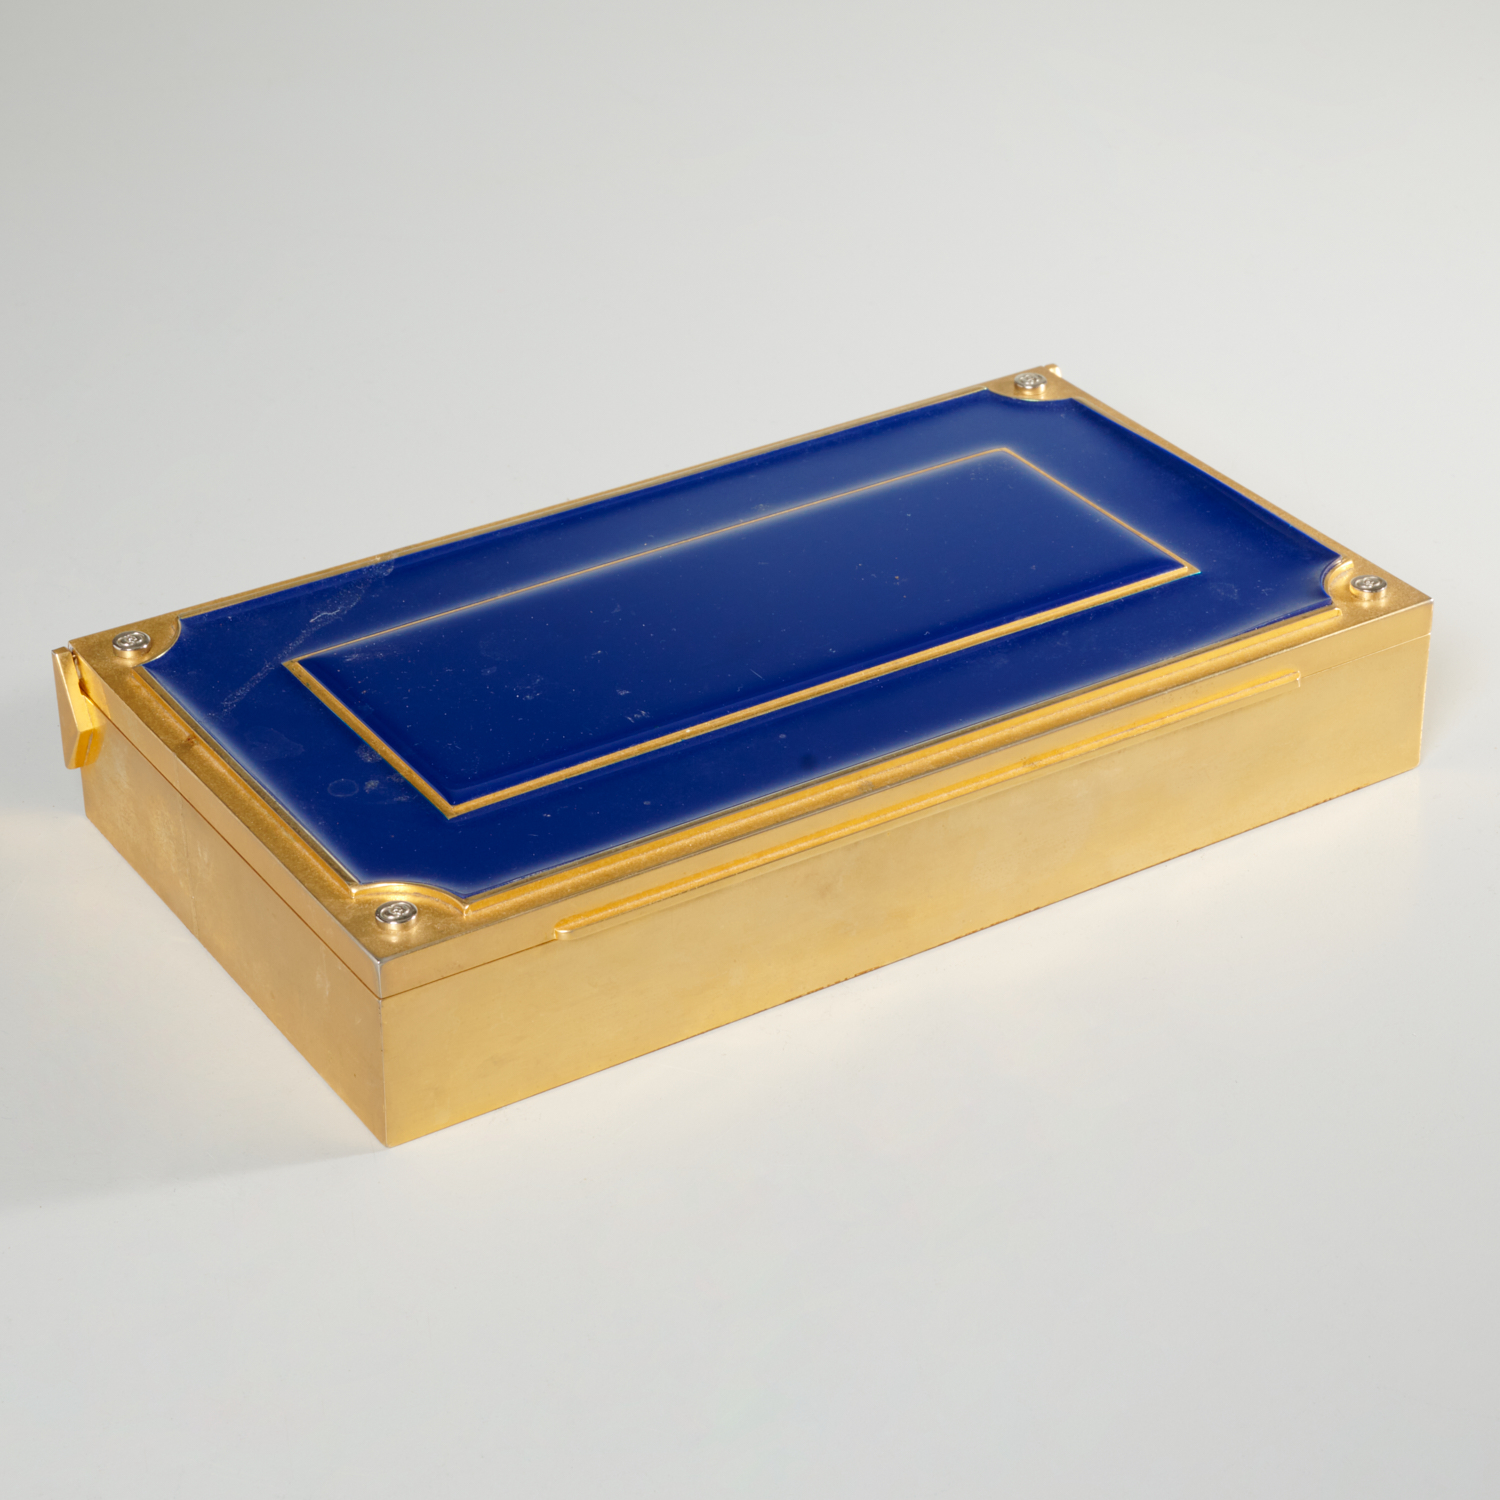 Sold at Auction: GUCCI Gold Tone Cigarette Box, Italy